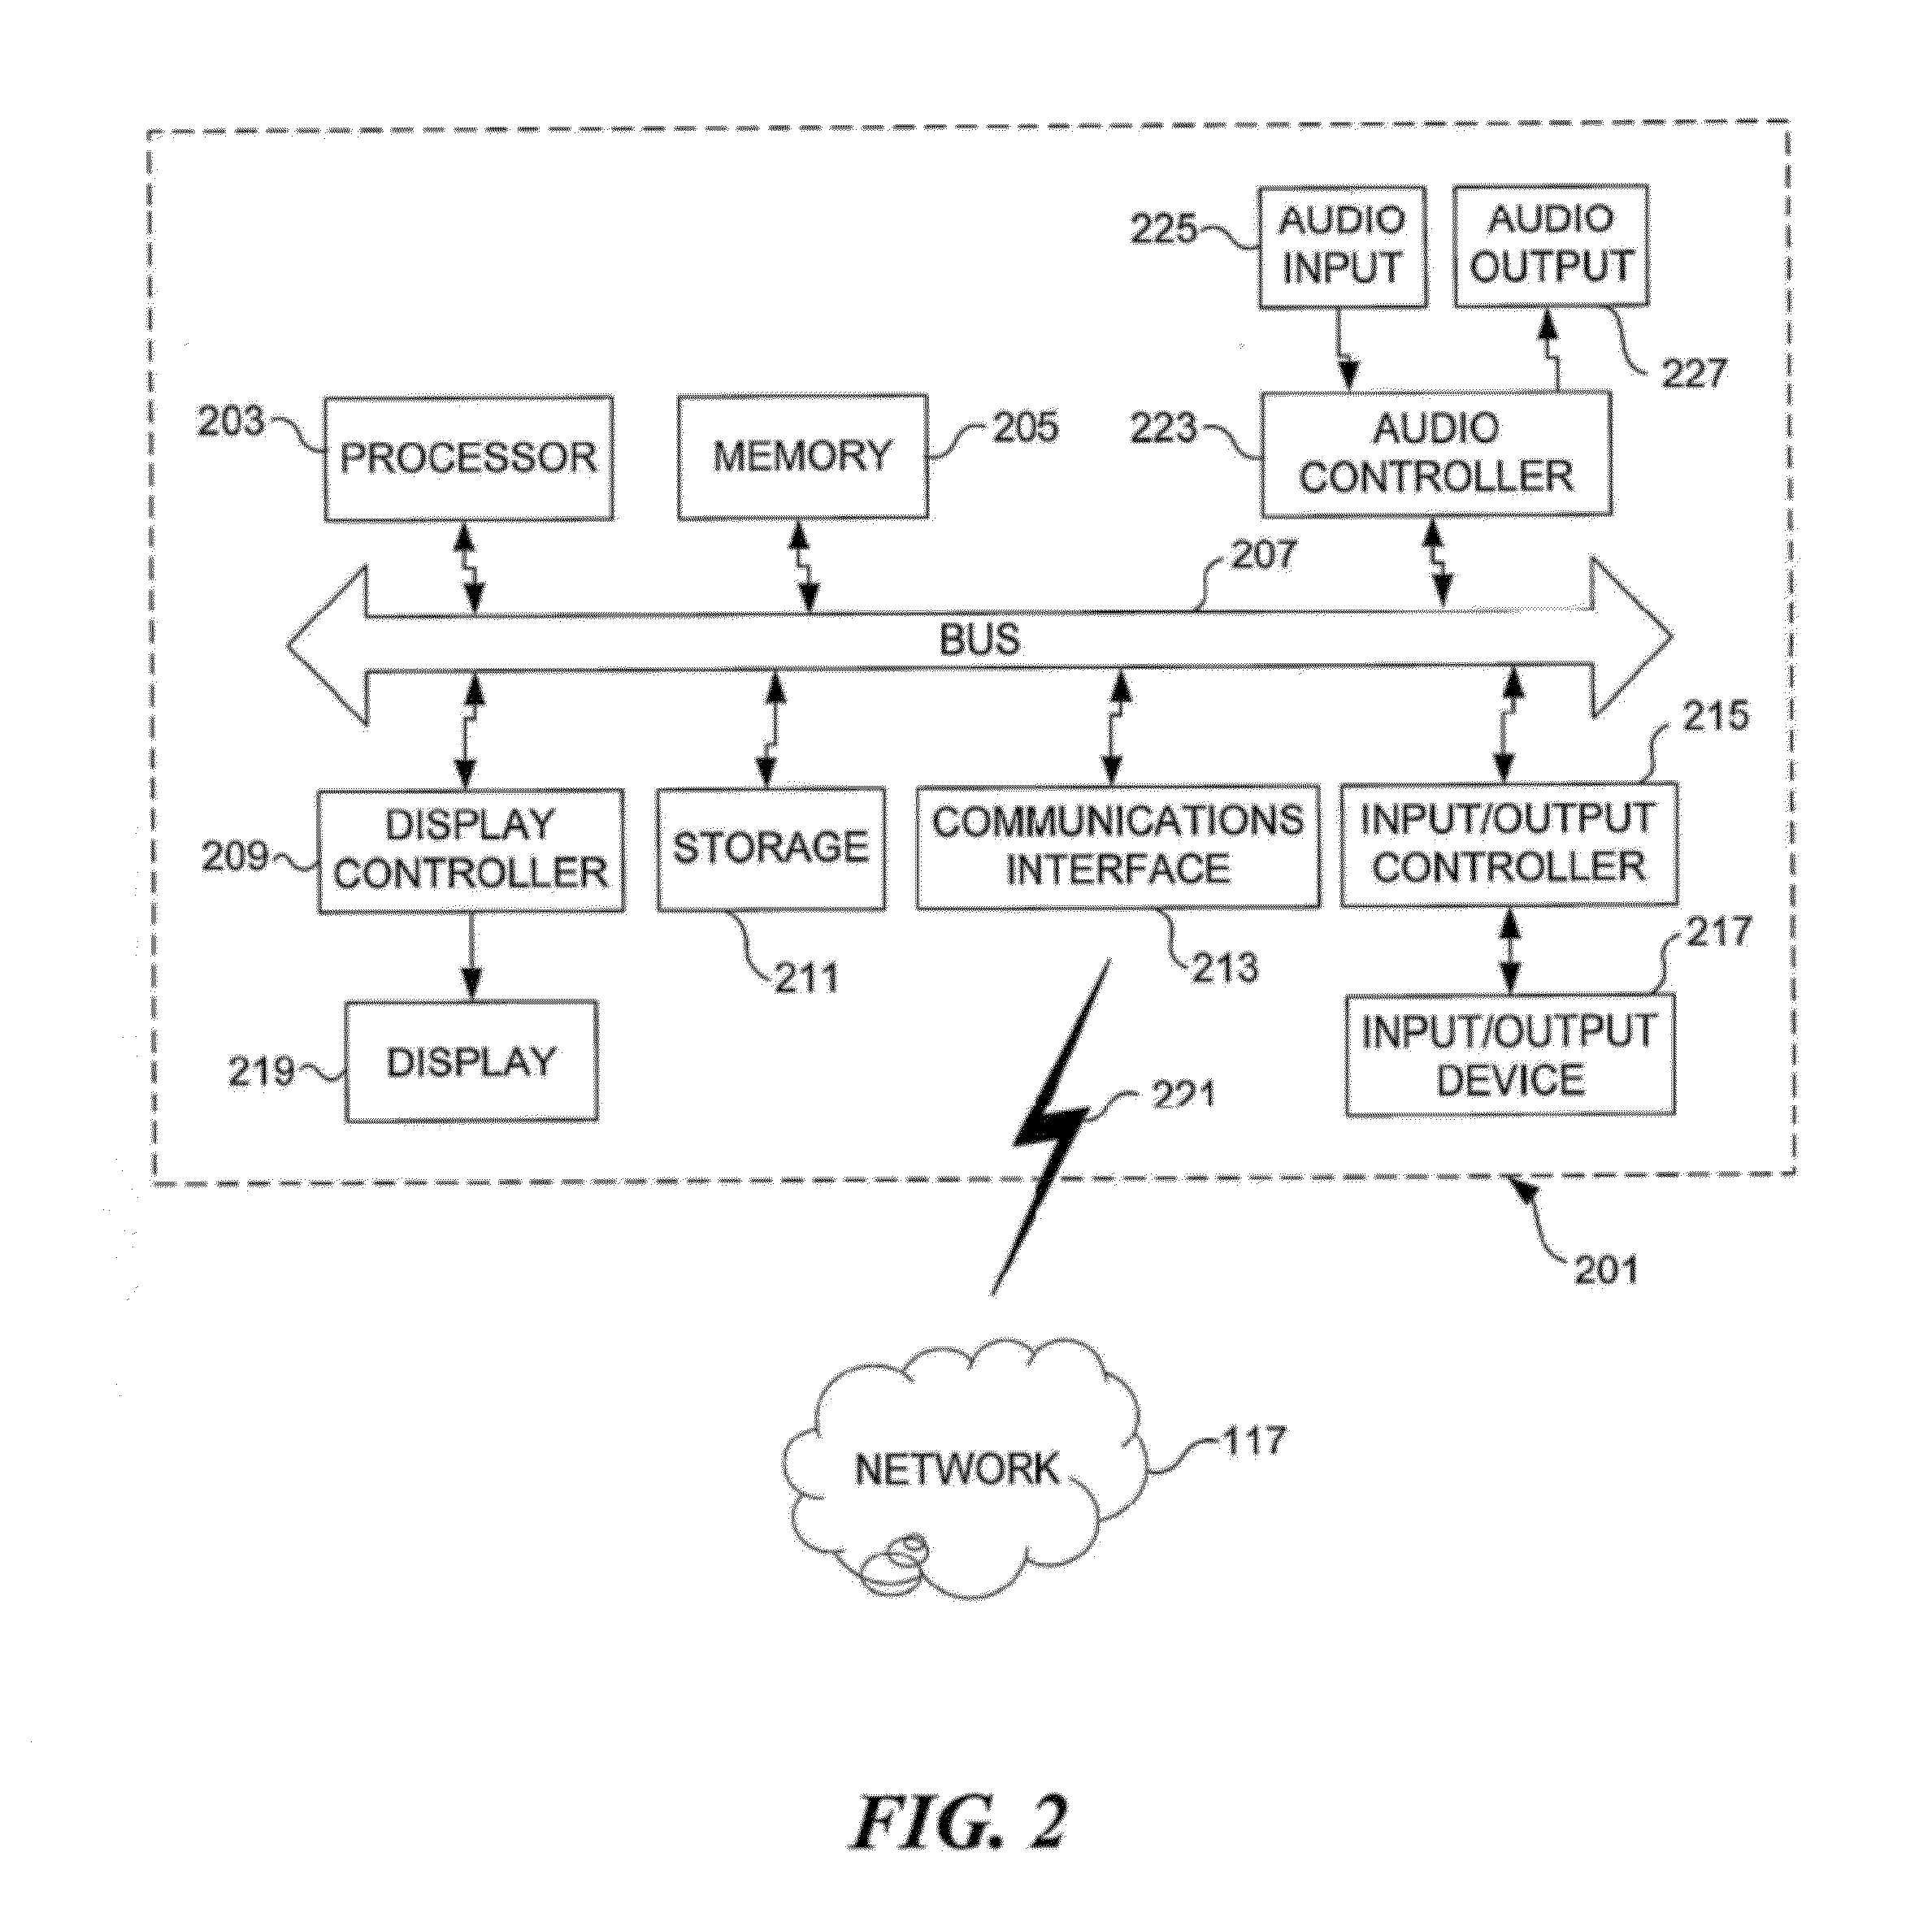 Methods and apparatus for centralized global tax computation, management, and compliance reporting